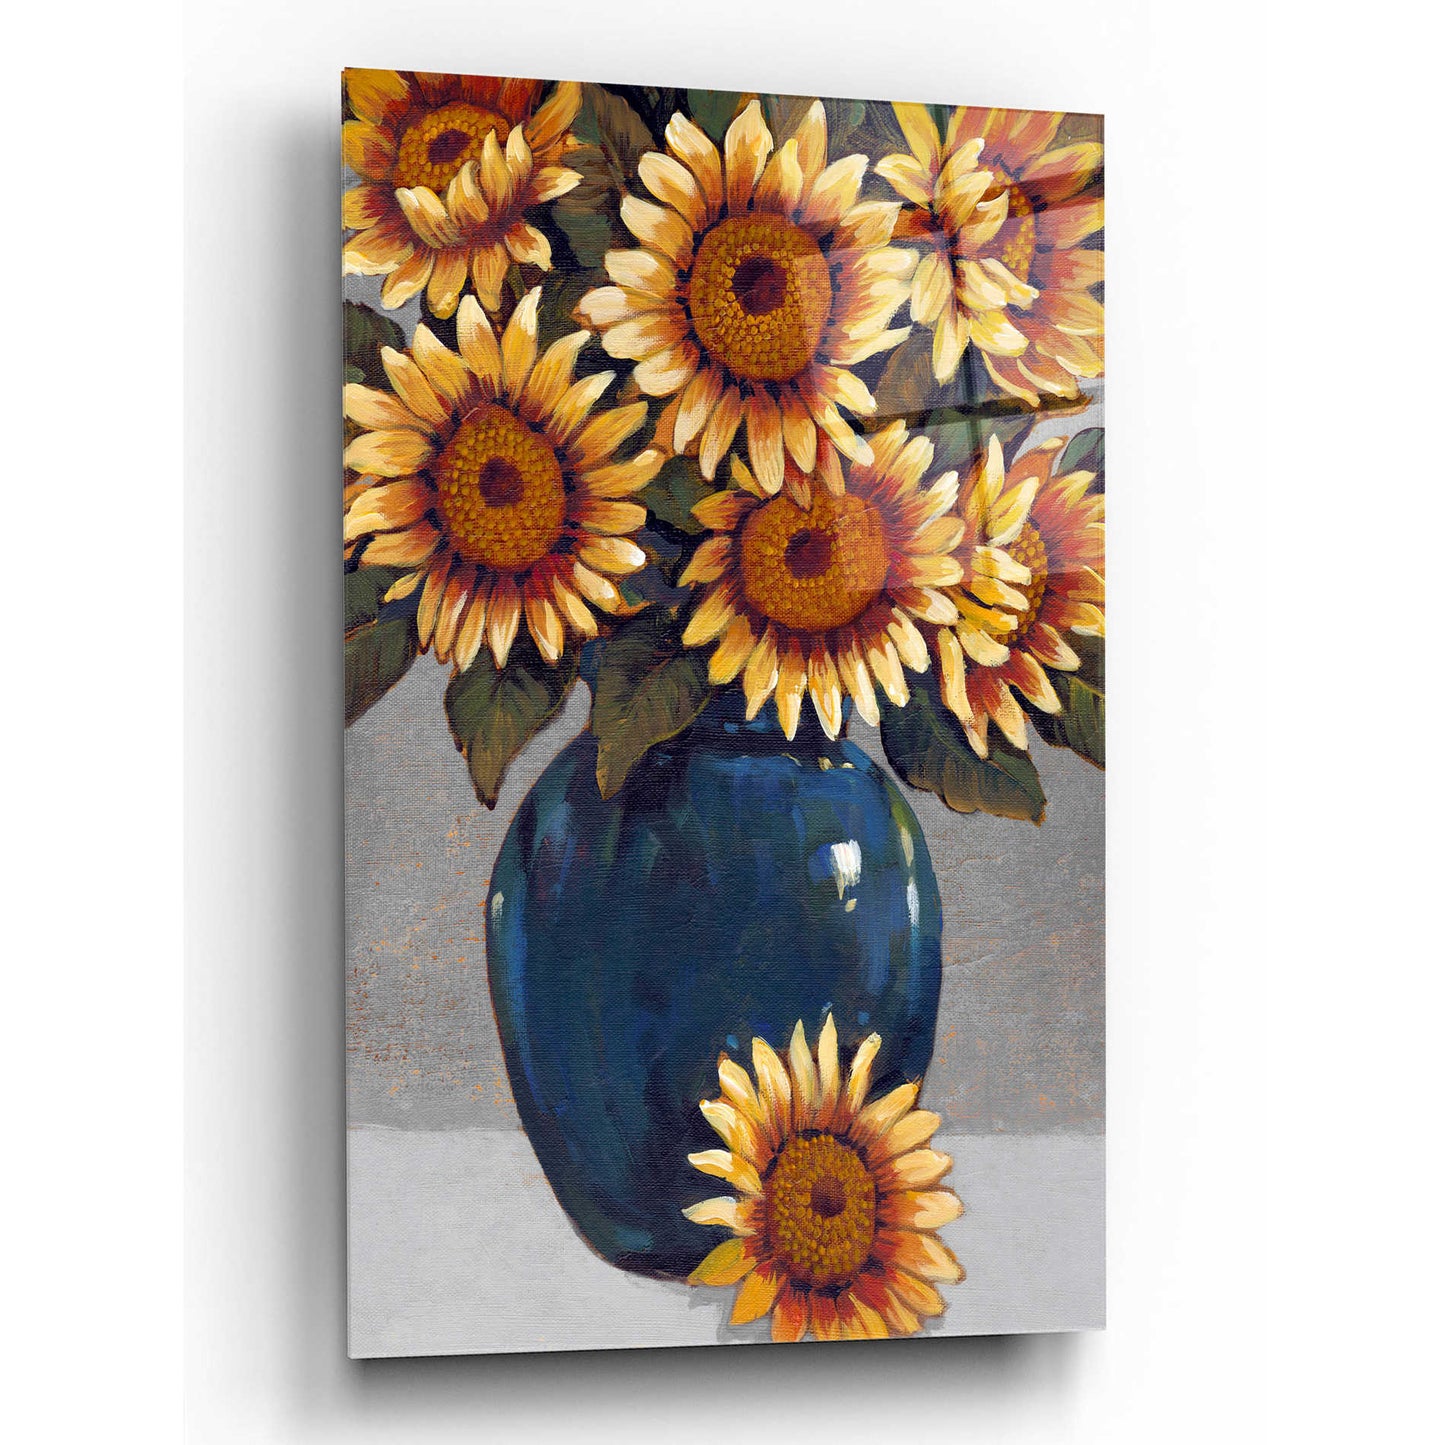 Epic Art 'Vase of Sunflowers I' by Tim O'Toole, Acrylic Glass Wall Art,16x24